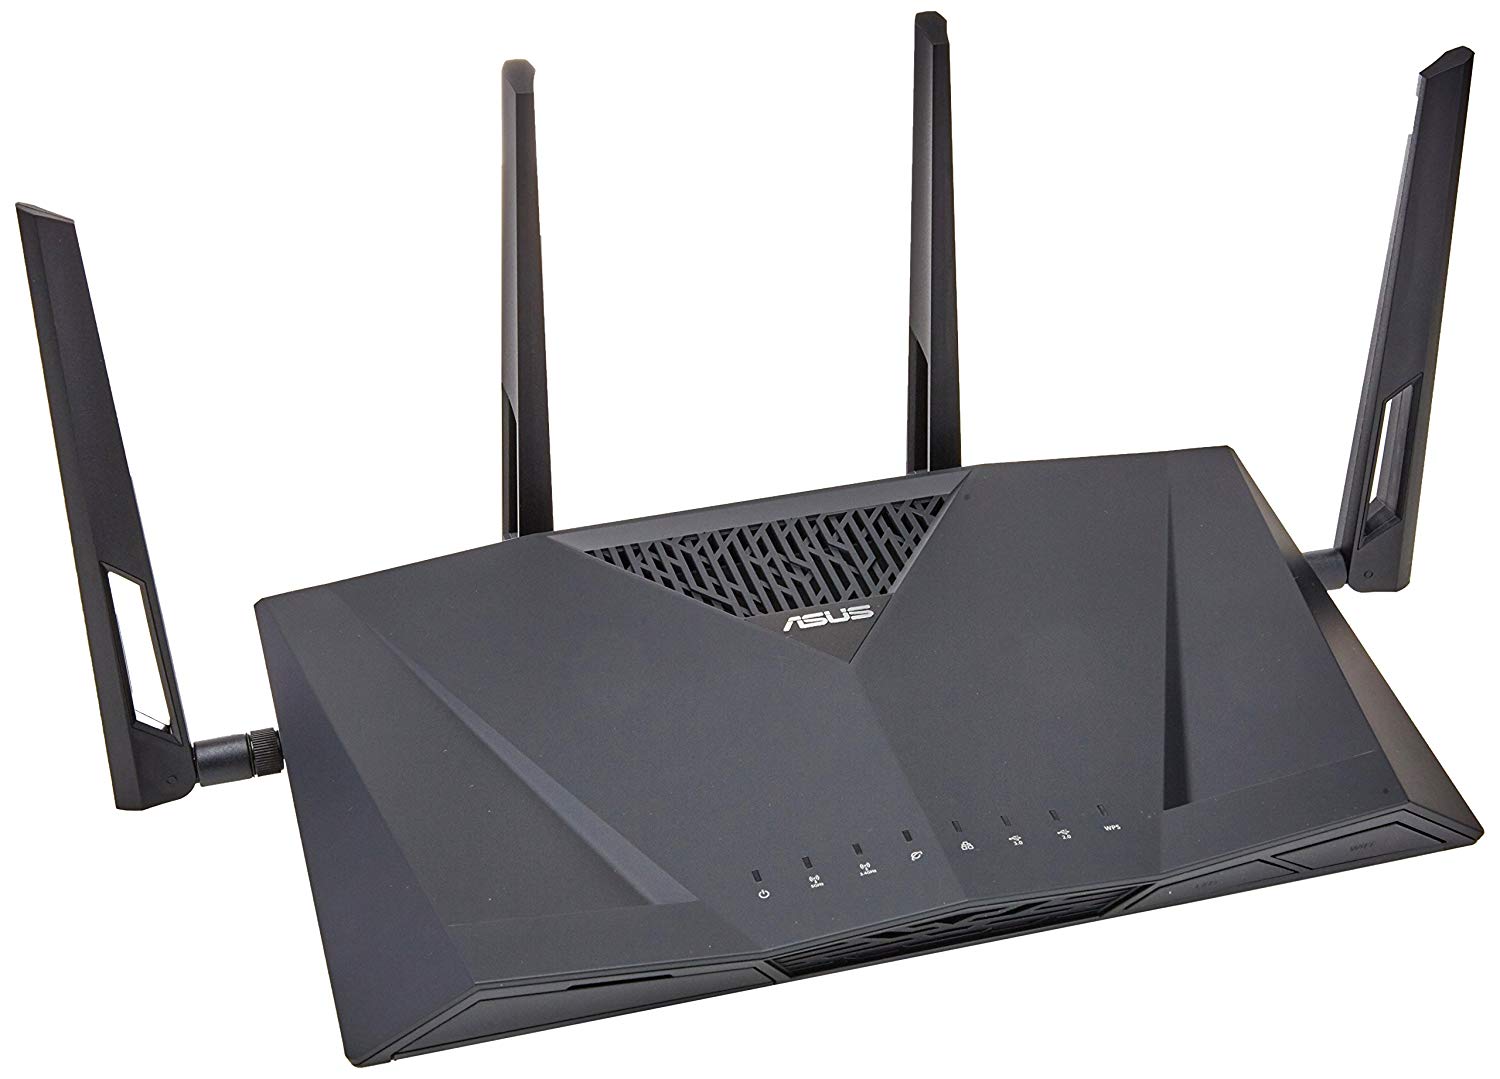 How do I setup my Asus router?